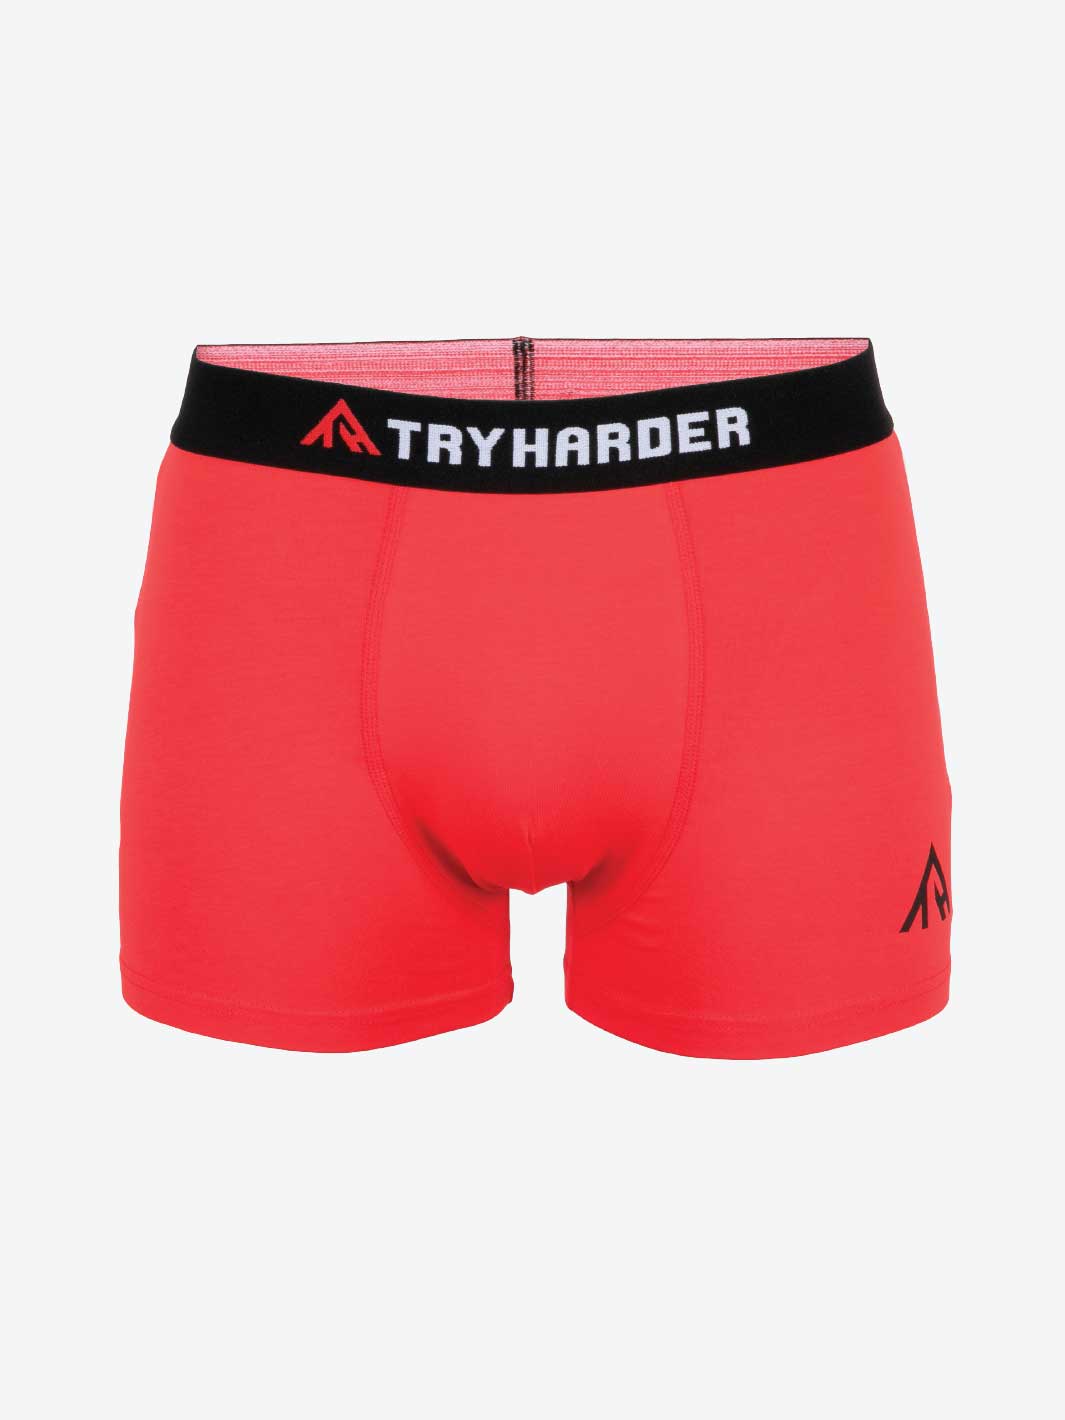 TRYHARDER - Boxer - Rot 1 Pack